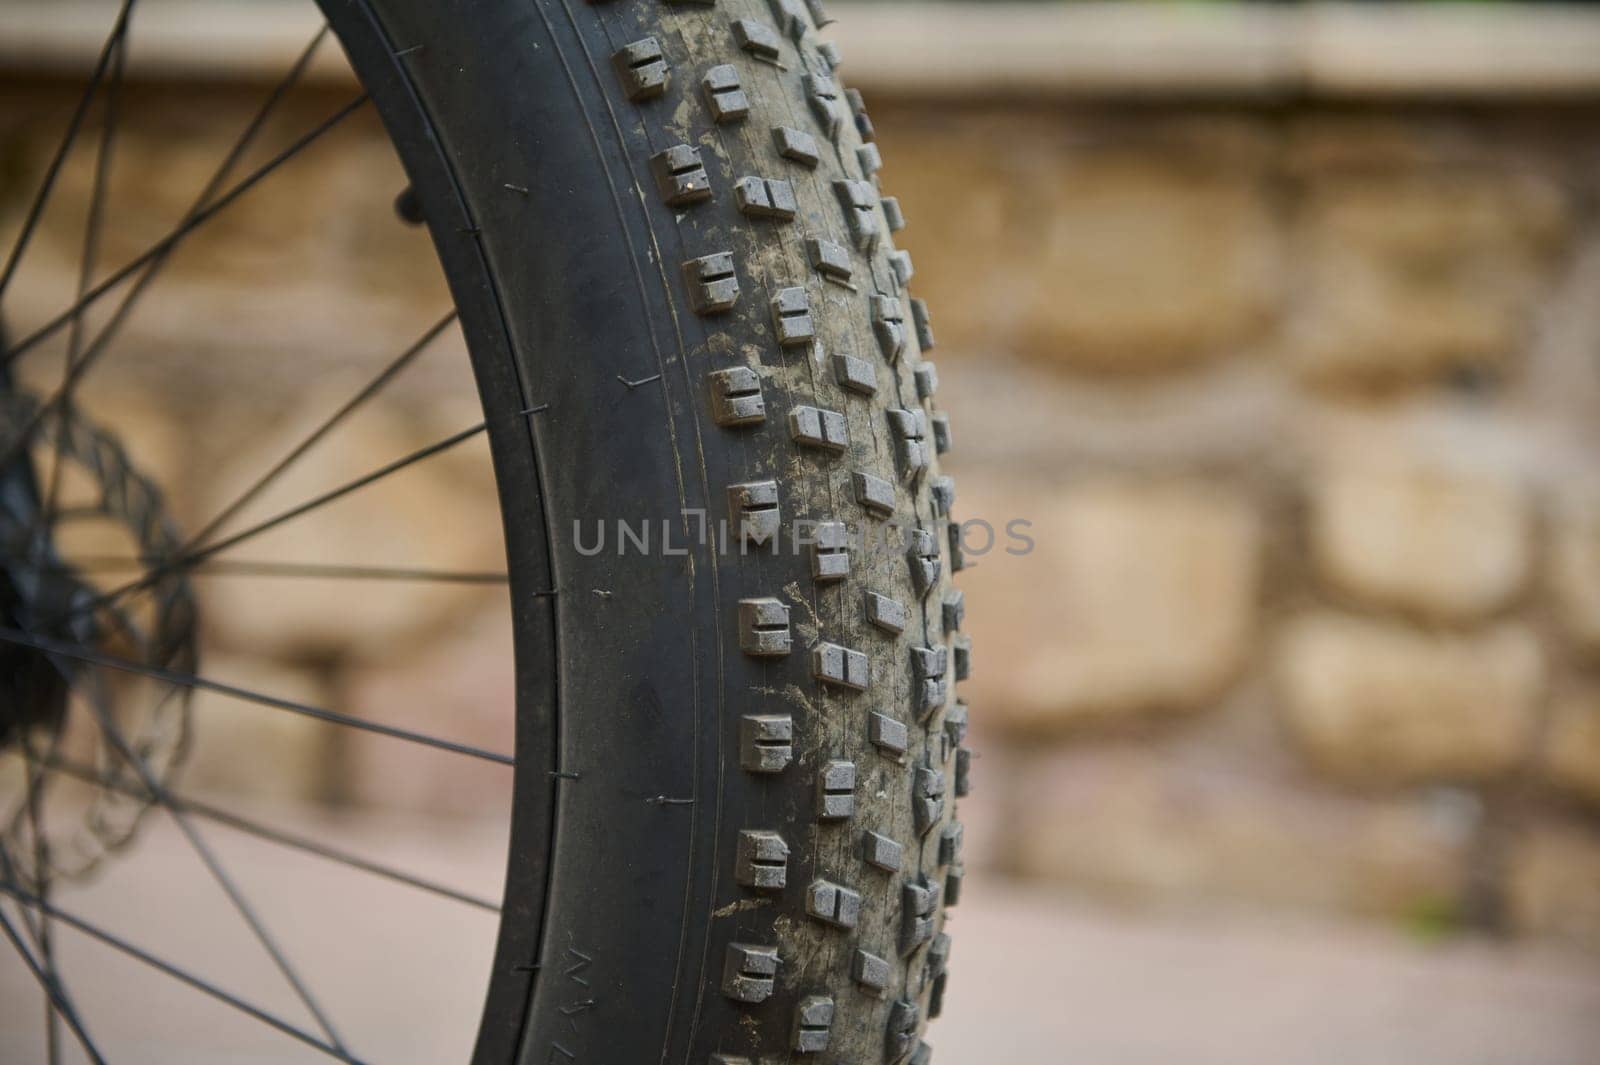 Shallow tread of a bicycle tubeless tire. Details on tubeless tire of an electric motor bike, mountain bike. Cropped view of electric bike bicycle wheel with spokes. Copy advertising space by artgf